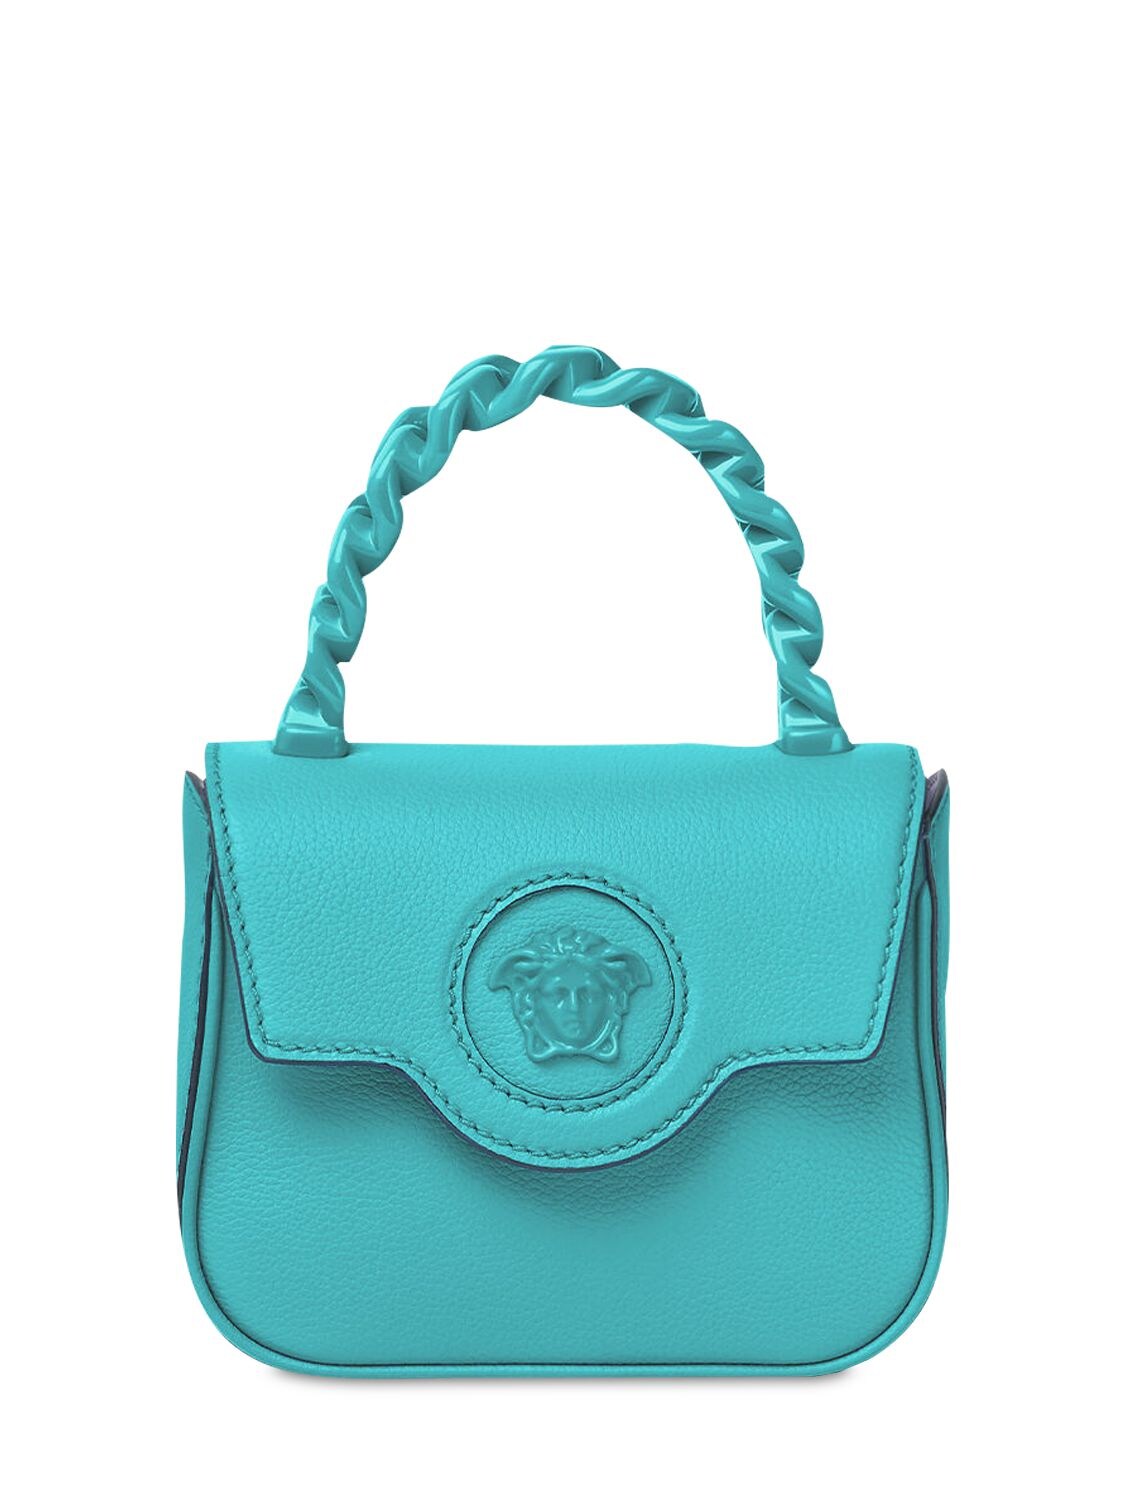 Versace Medusa Grained Leather Top Handle Bag In Бирюзовый